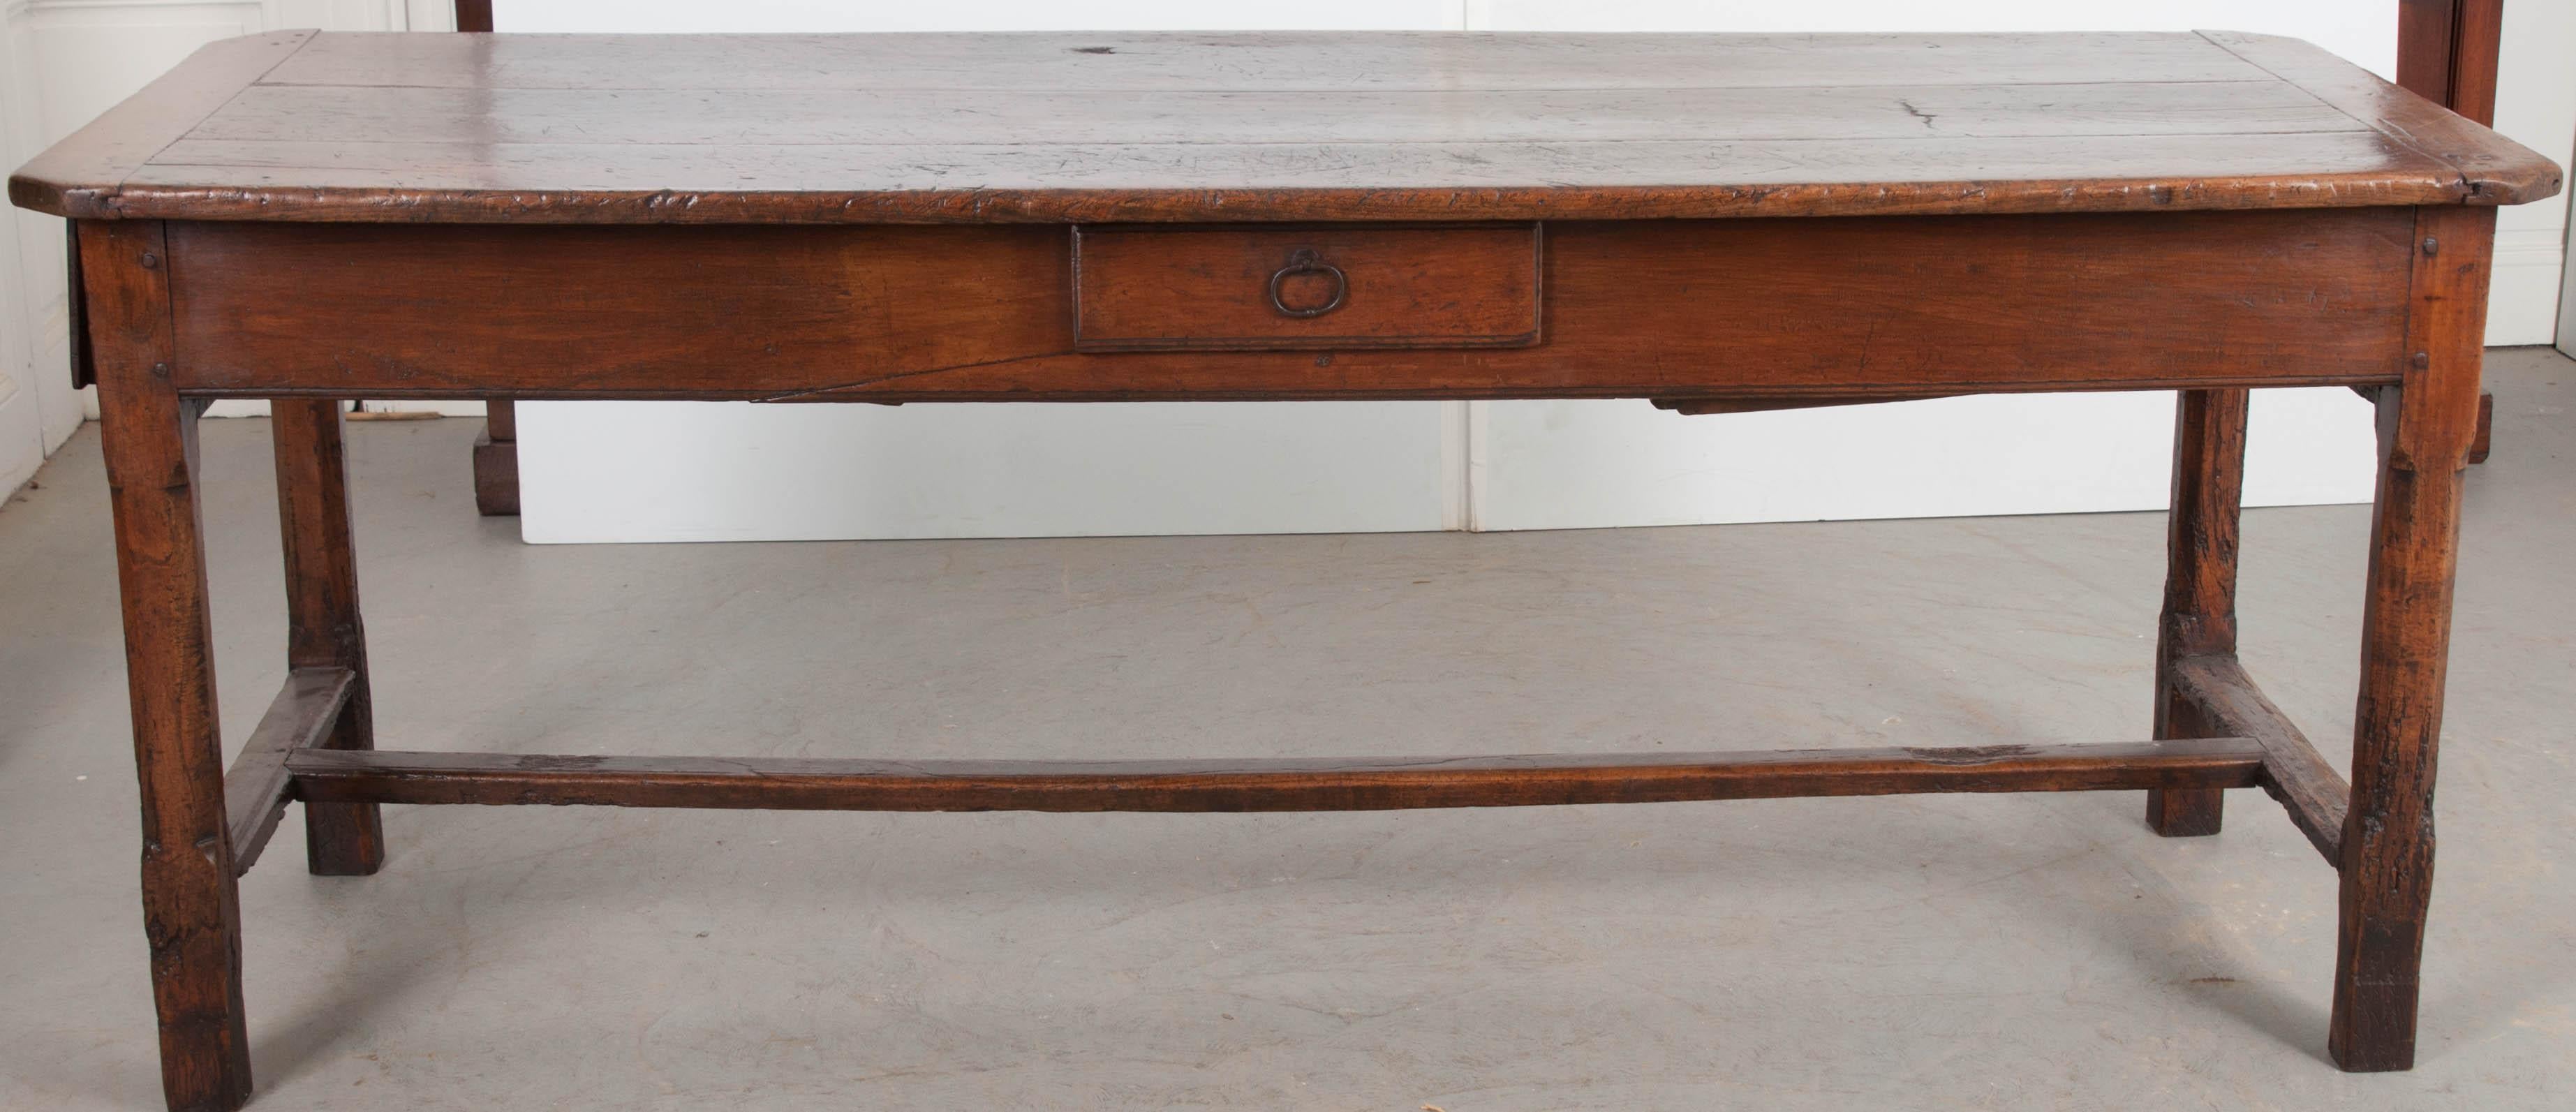 A spectacularly aged walnut farmhouse table from the French countryside, made circa 1830. The table has a marvellous top, is made of three boards, and has canted corners and breadboard ends. Three large drawers reside in the table’s apron, allowing